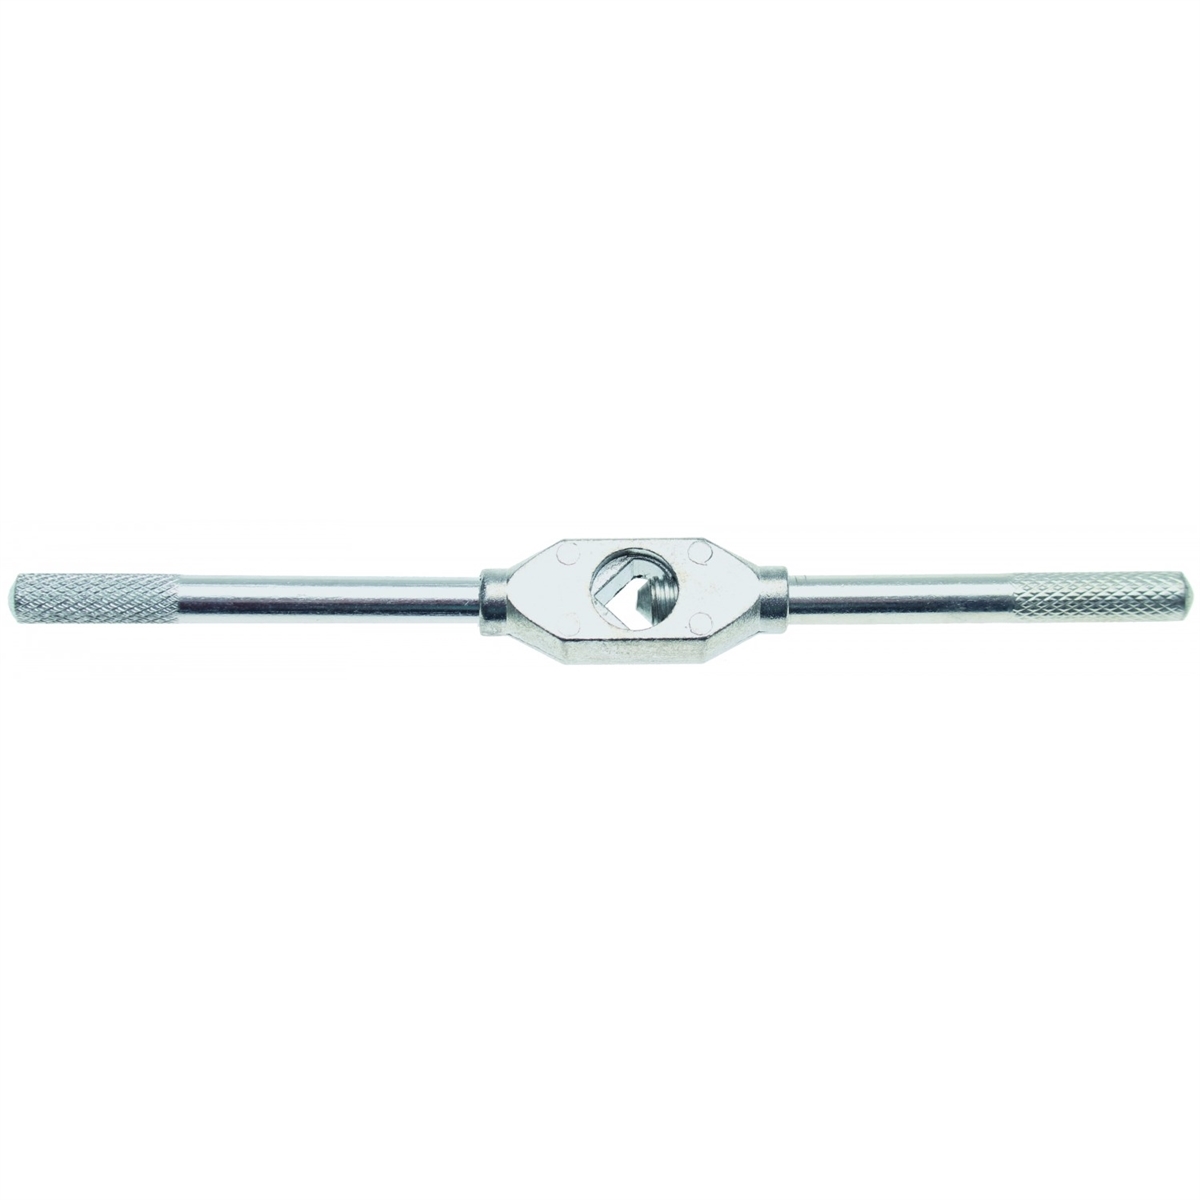 Tap Wrench M3 - M12 - Code BGS1900-1